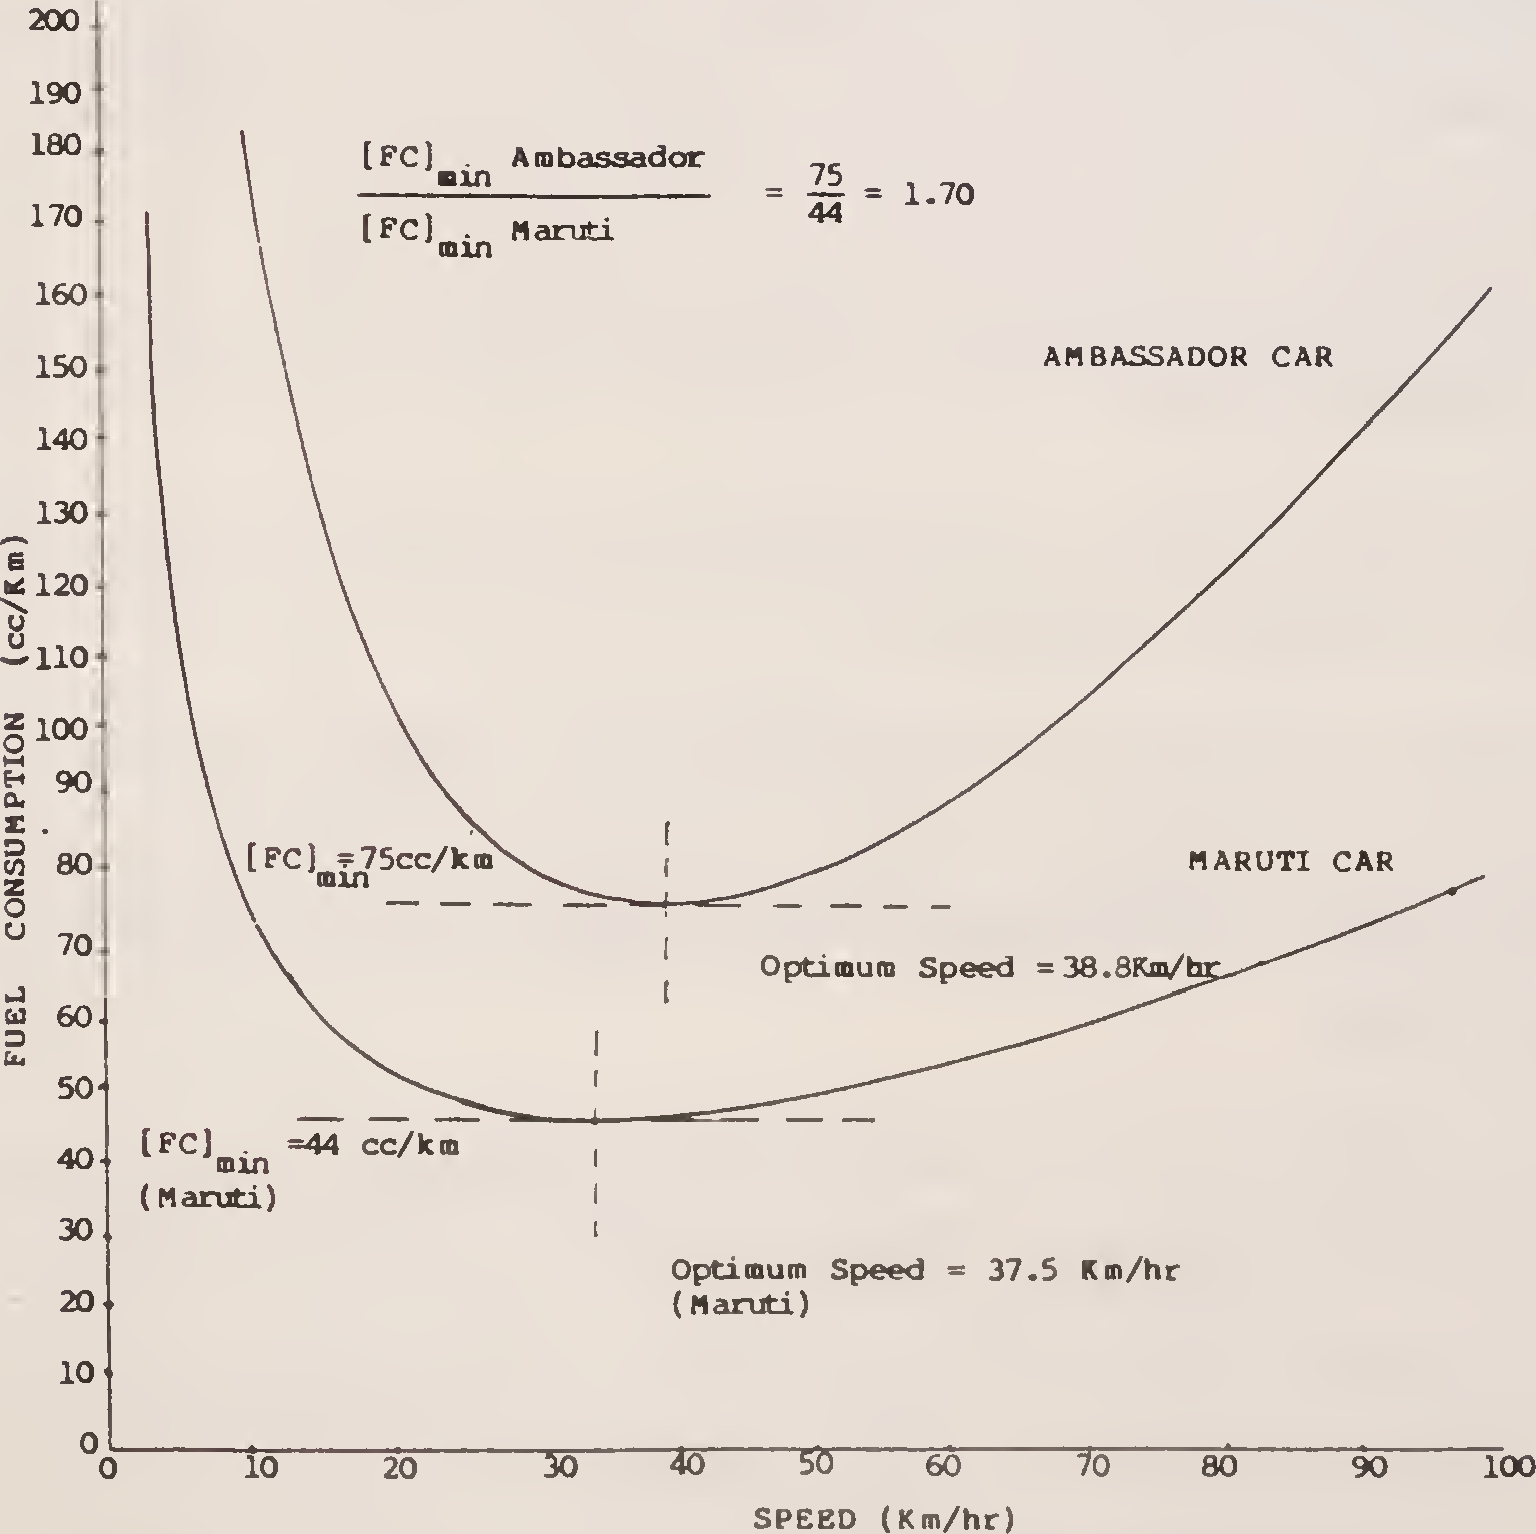 Fig. 30. Consumption - speed plots for Ambassador and Maruti cars